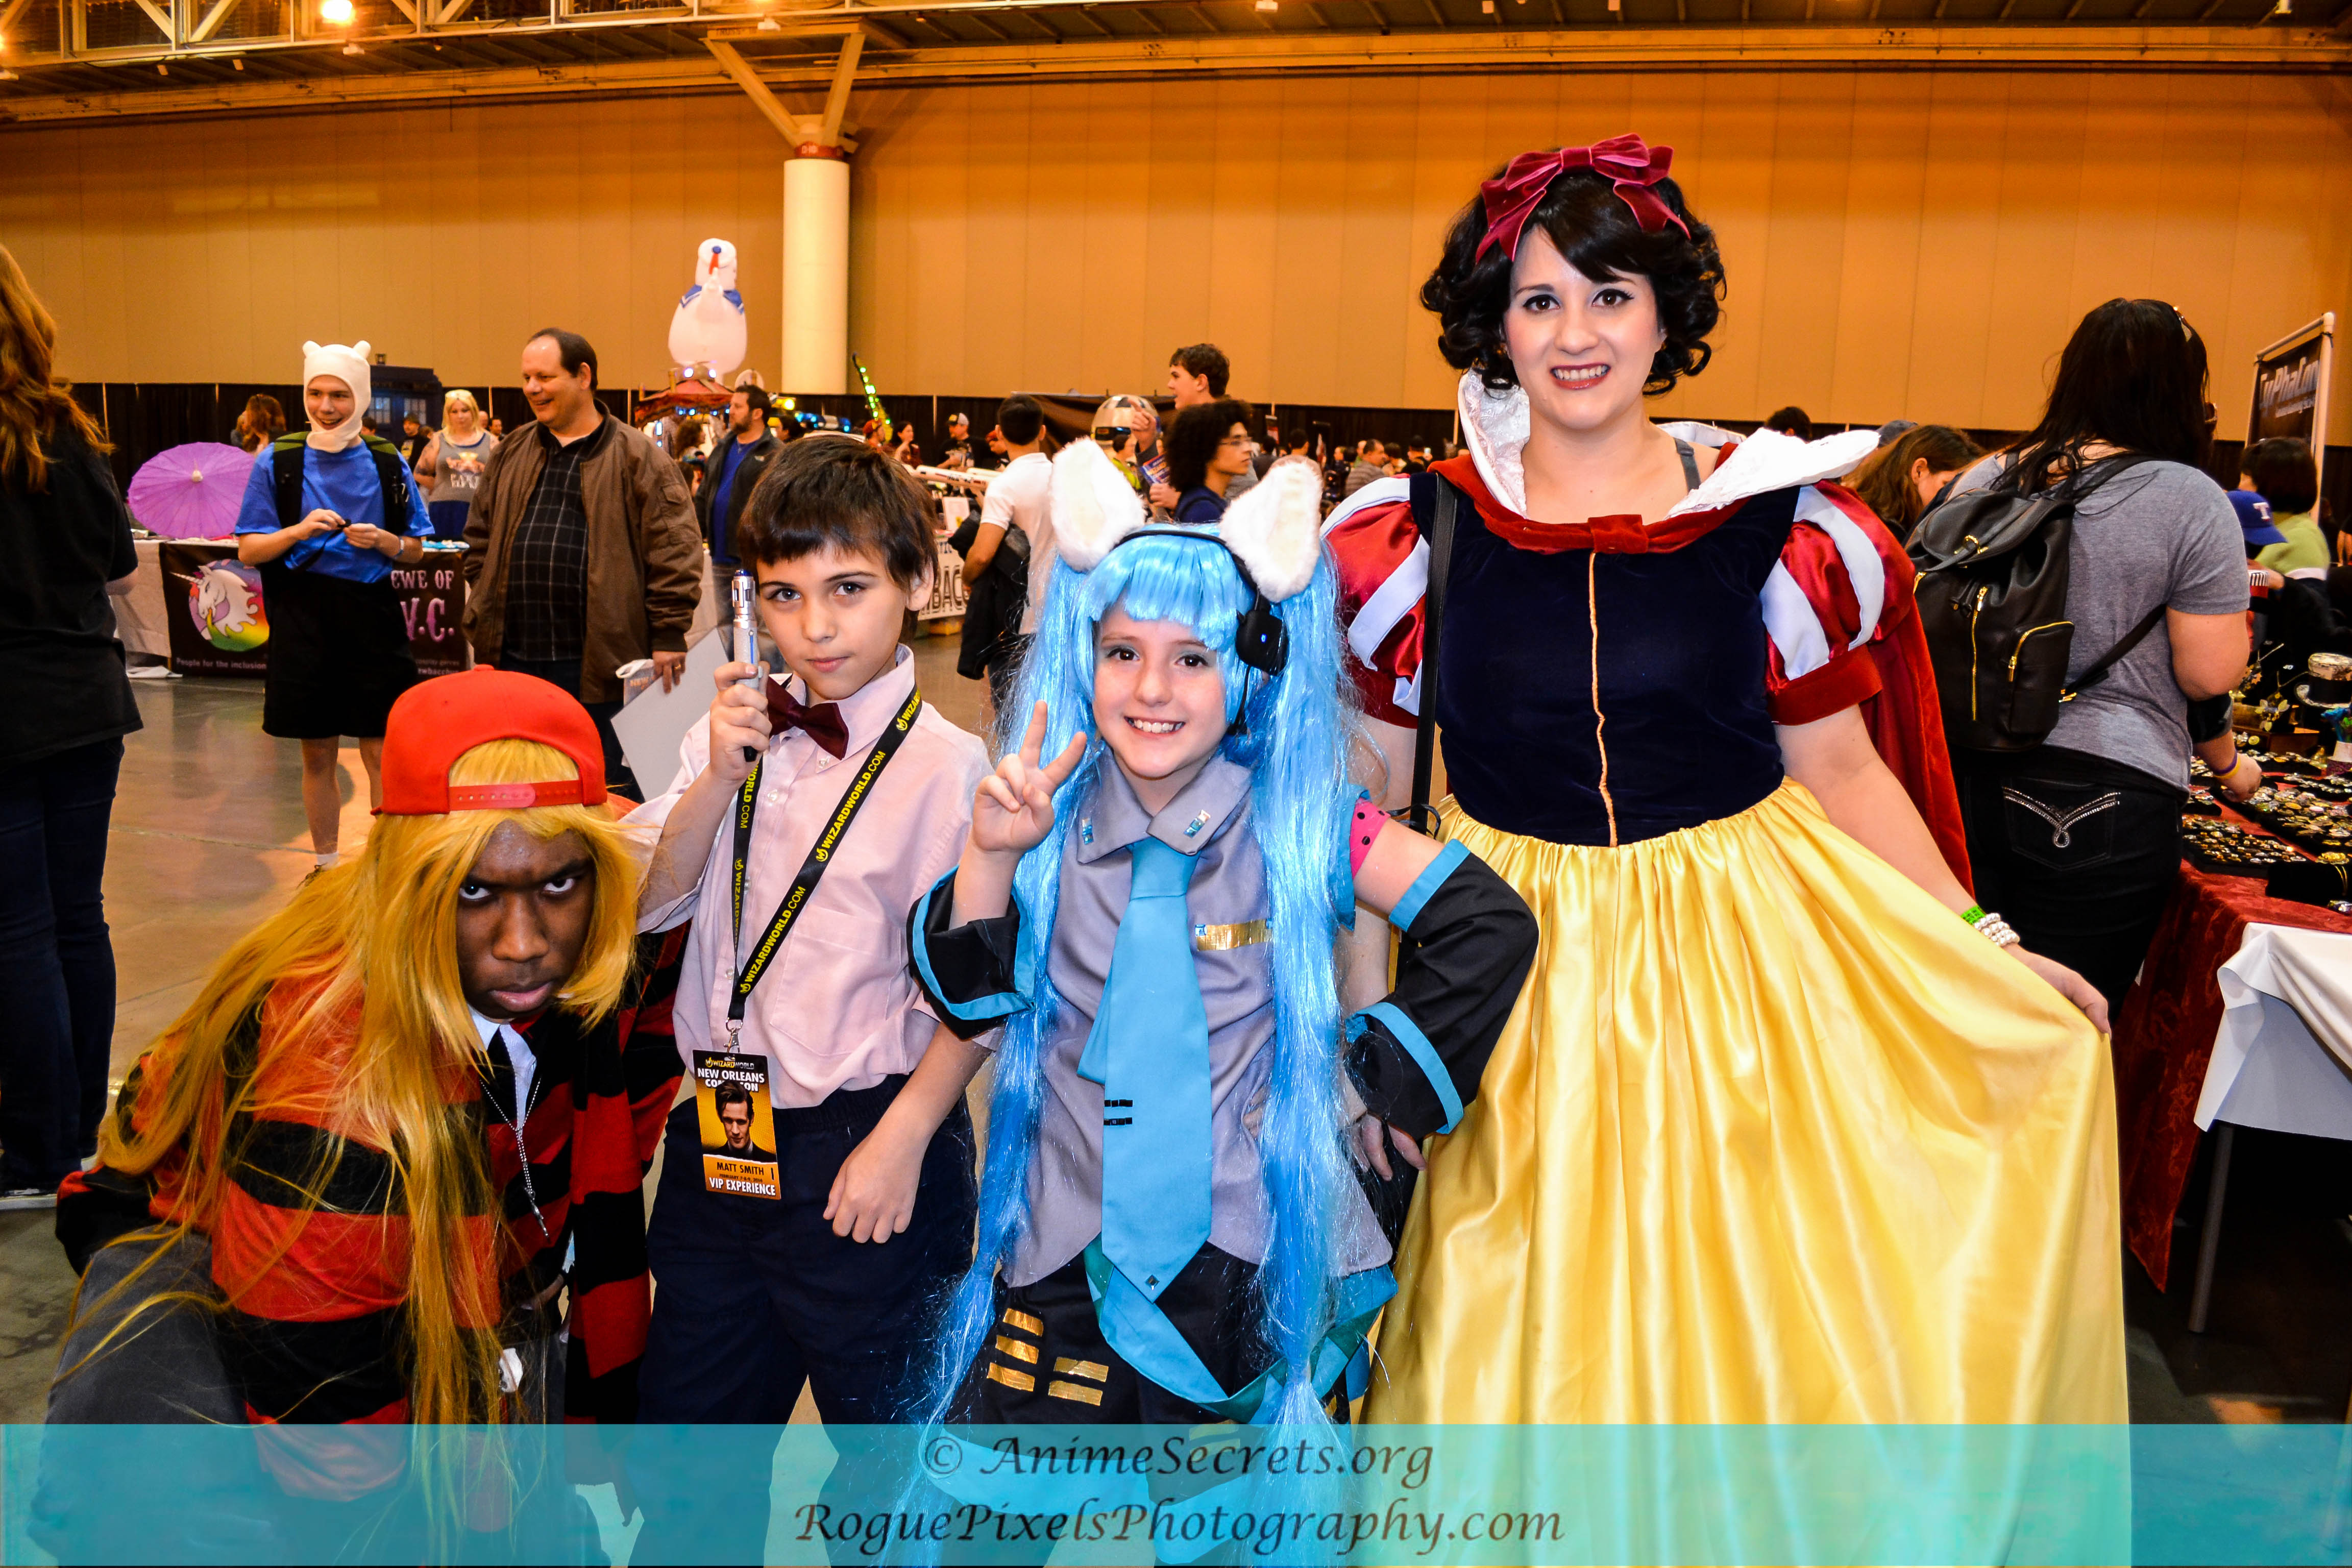 List Of Anime Conventions: Most Up-to-Date Encyclopedia, News & Reviews